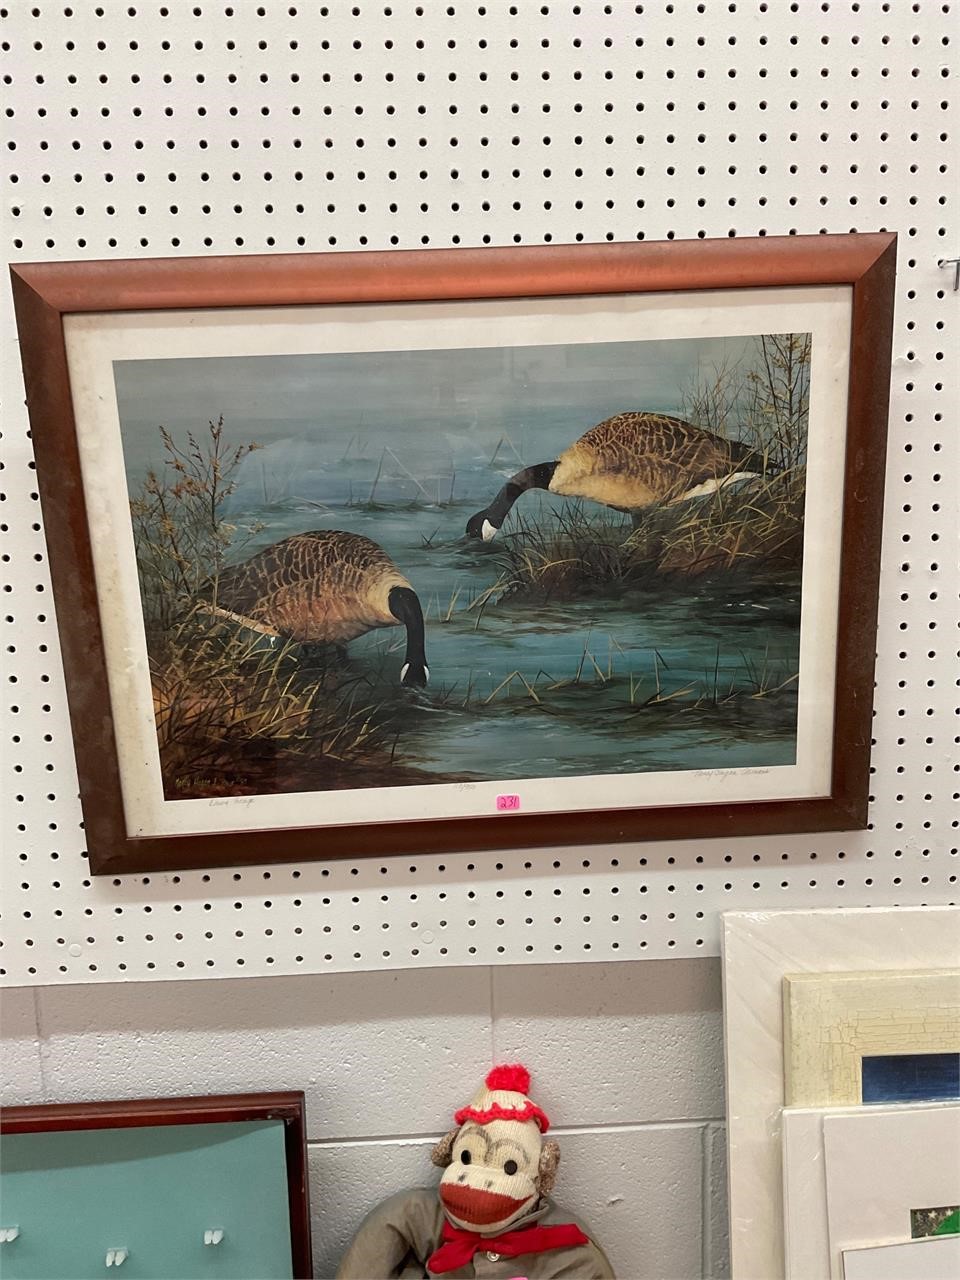 Signed and Numbered Goose Print